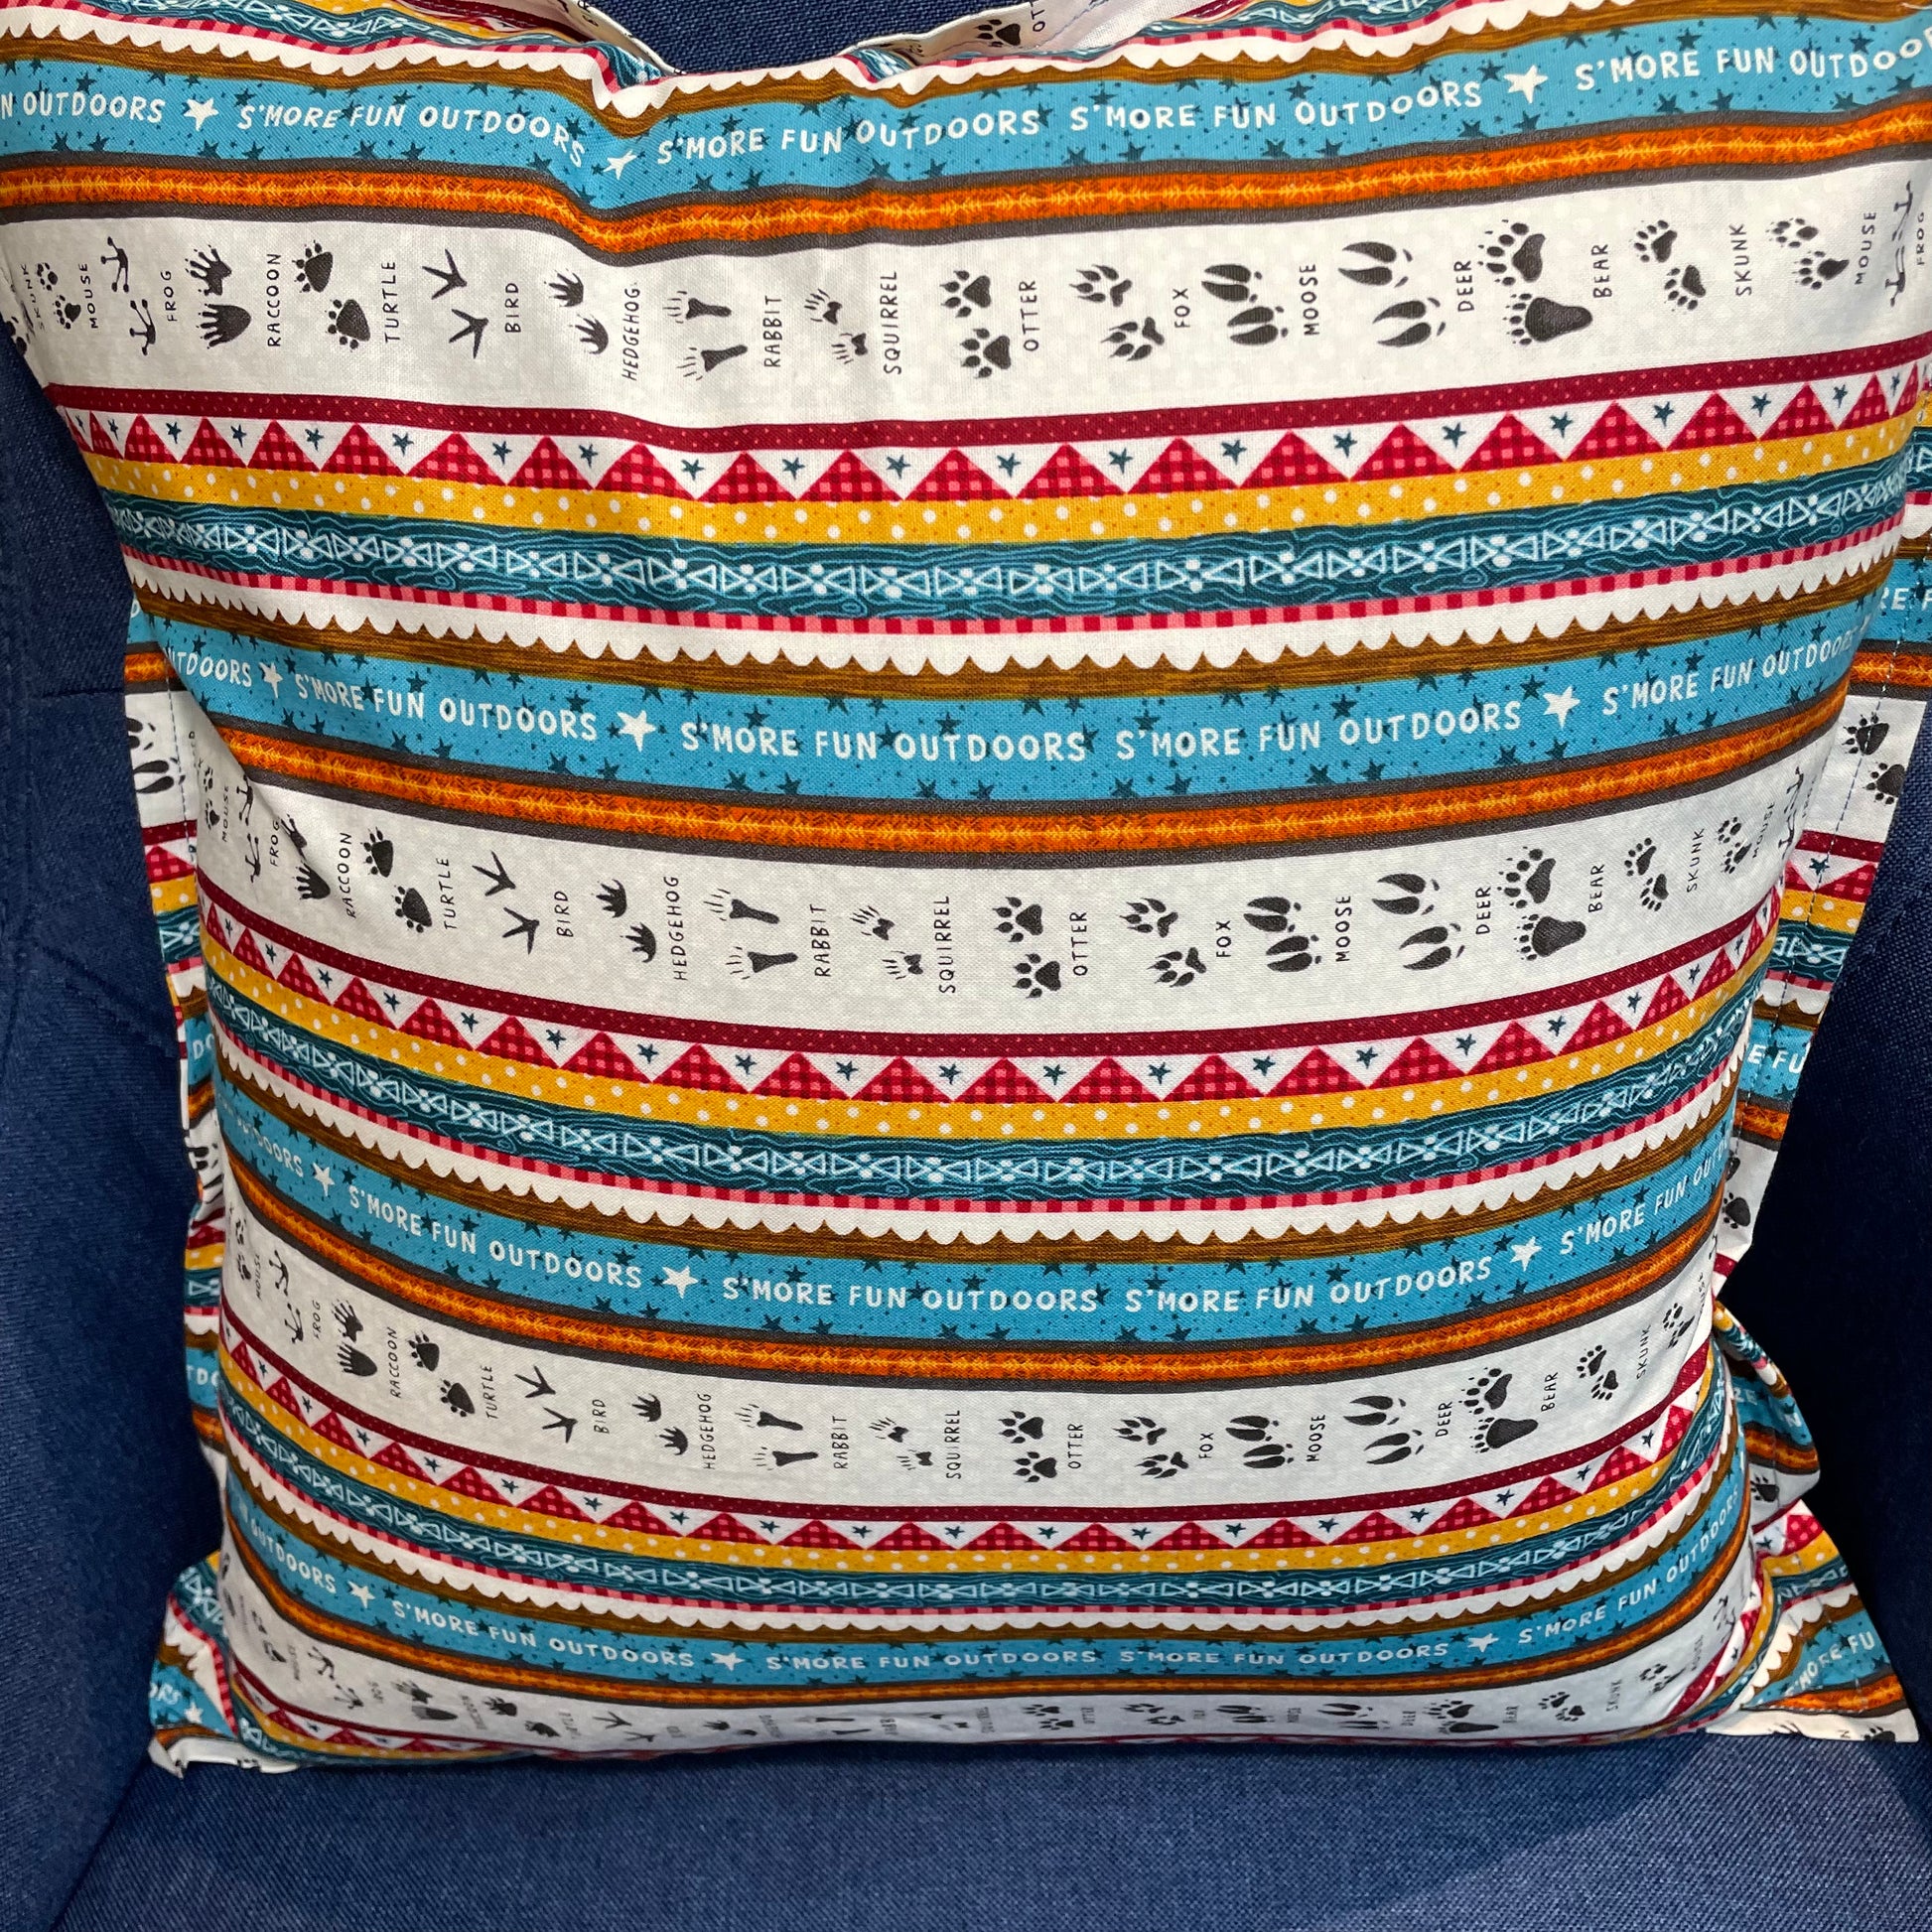 Camping Decorative Pillow for your RV, Camper Decor. Let's go camping with mix and match decor. Shop the collection and follow along on the Home Stitchery Decor YouTube Channel. Pillow in white, teal, red, yellow and black. Woodland tracks camping themed pillow.